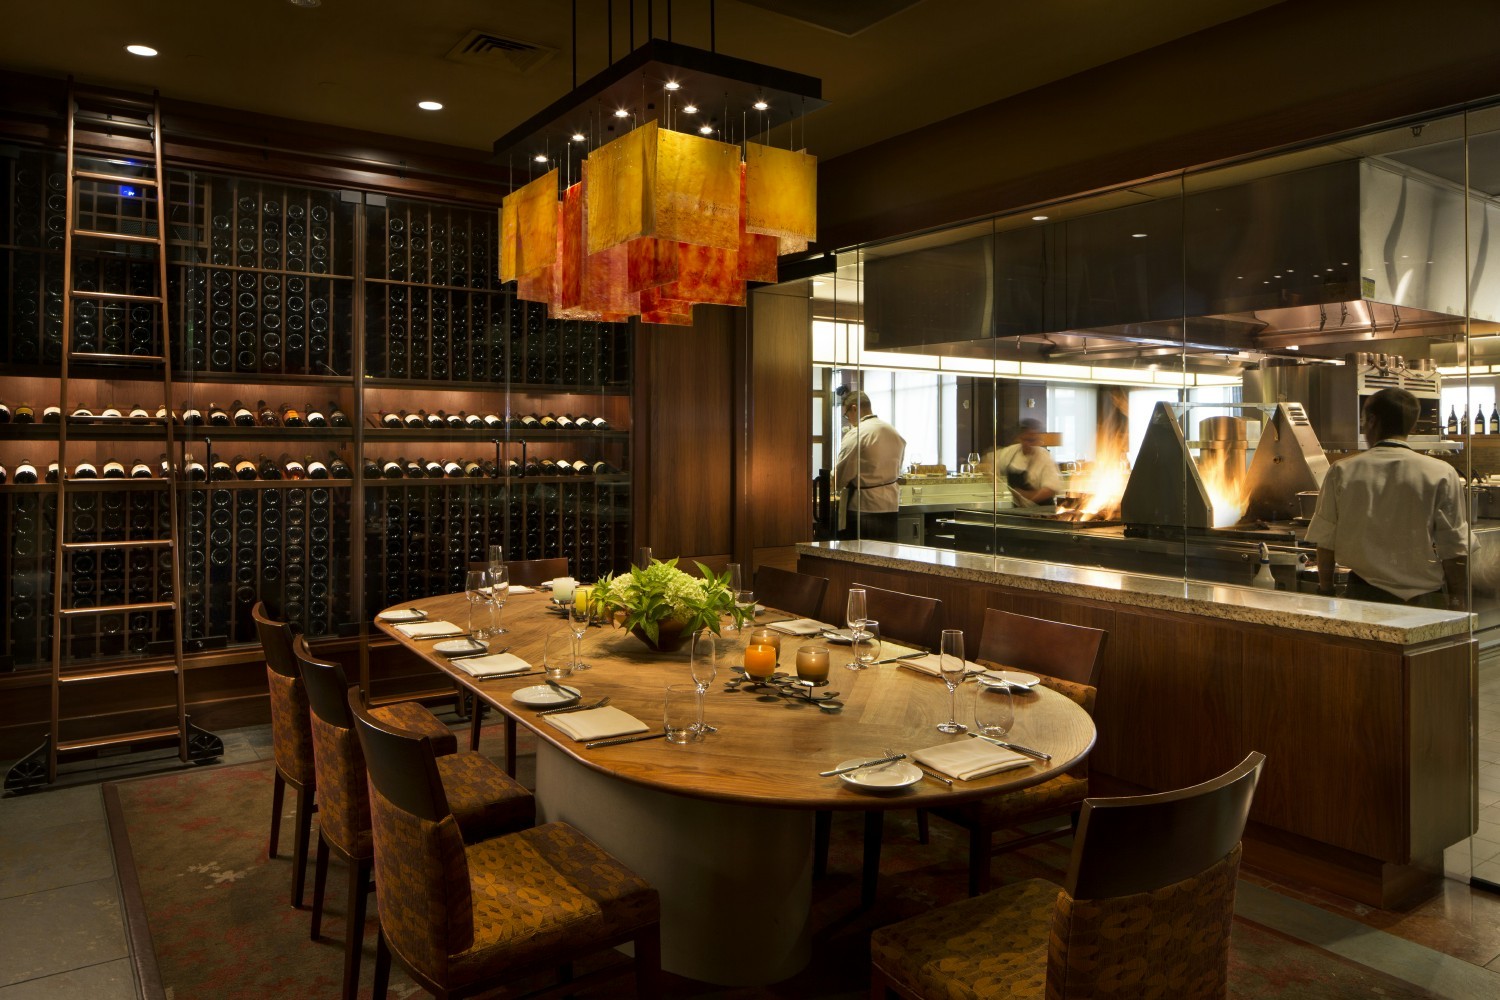 Chef's Table for a special private dining experience